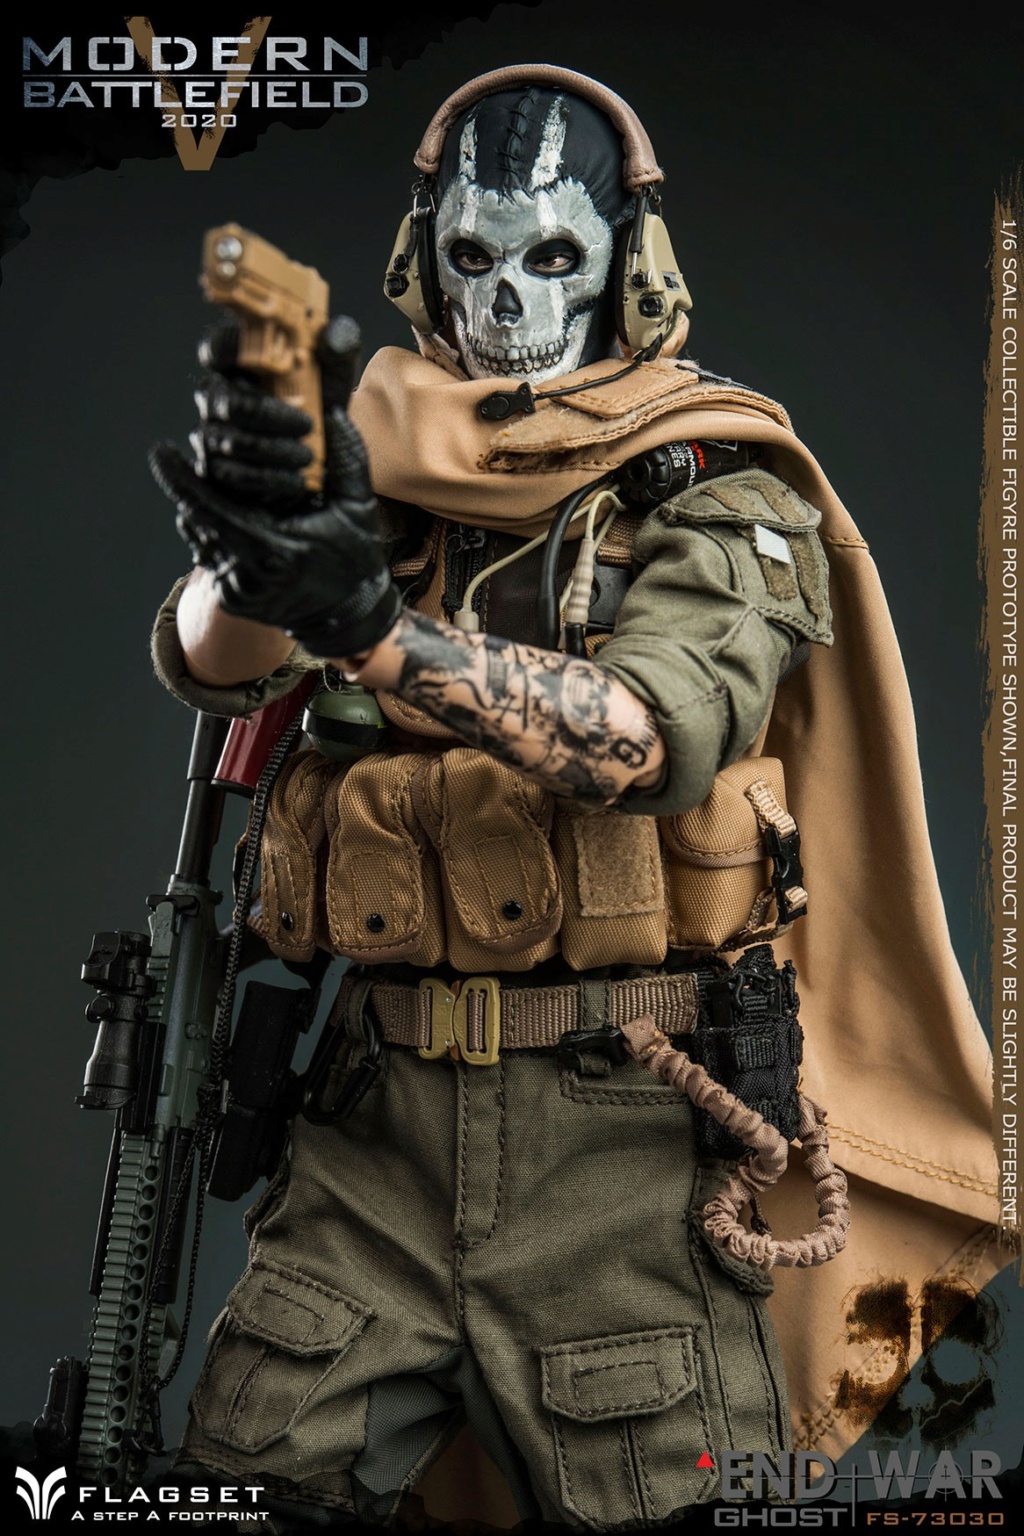 male - NEW PRODUCT: FLAGSET: 1/6 SCALE FIGURE MODERN BATTLEFIELD END WAR V GHOST 19255210